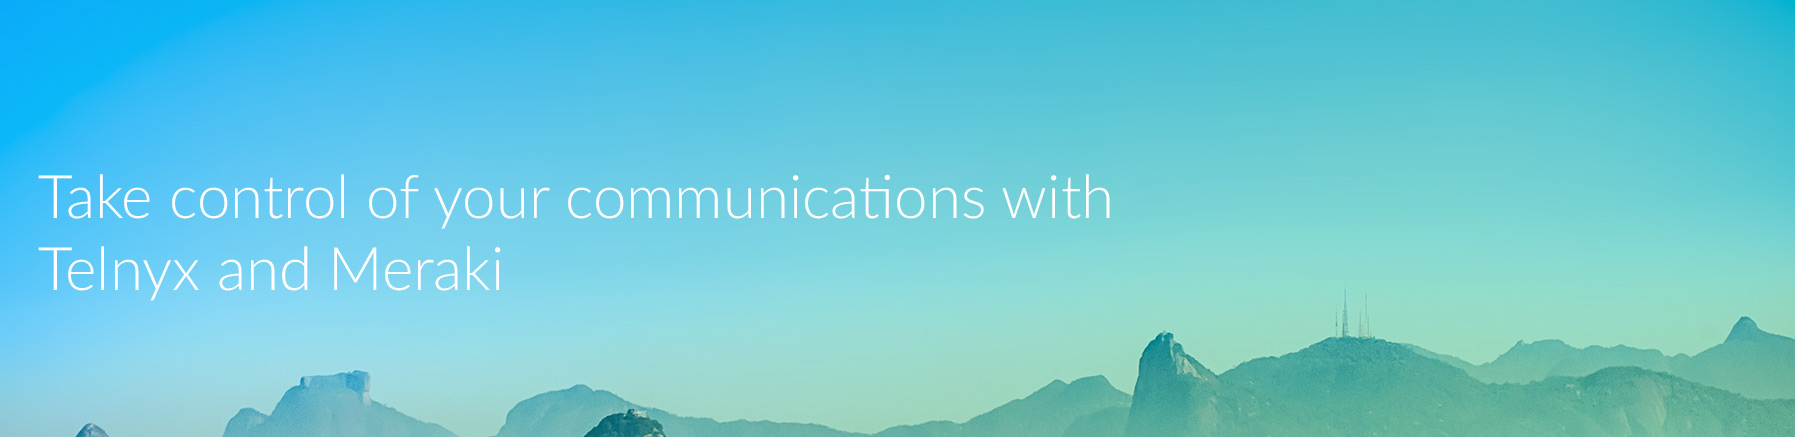 Take control of your communication banner